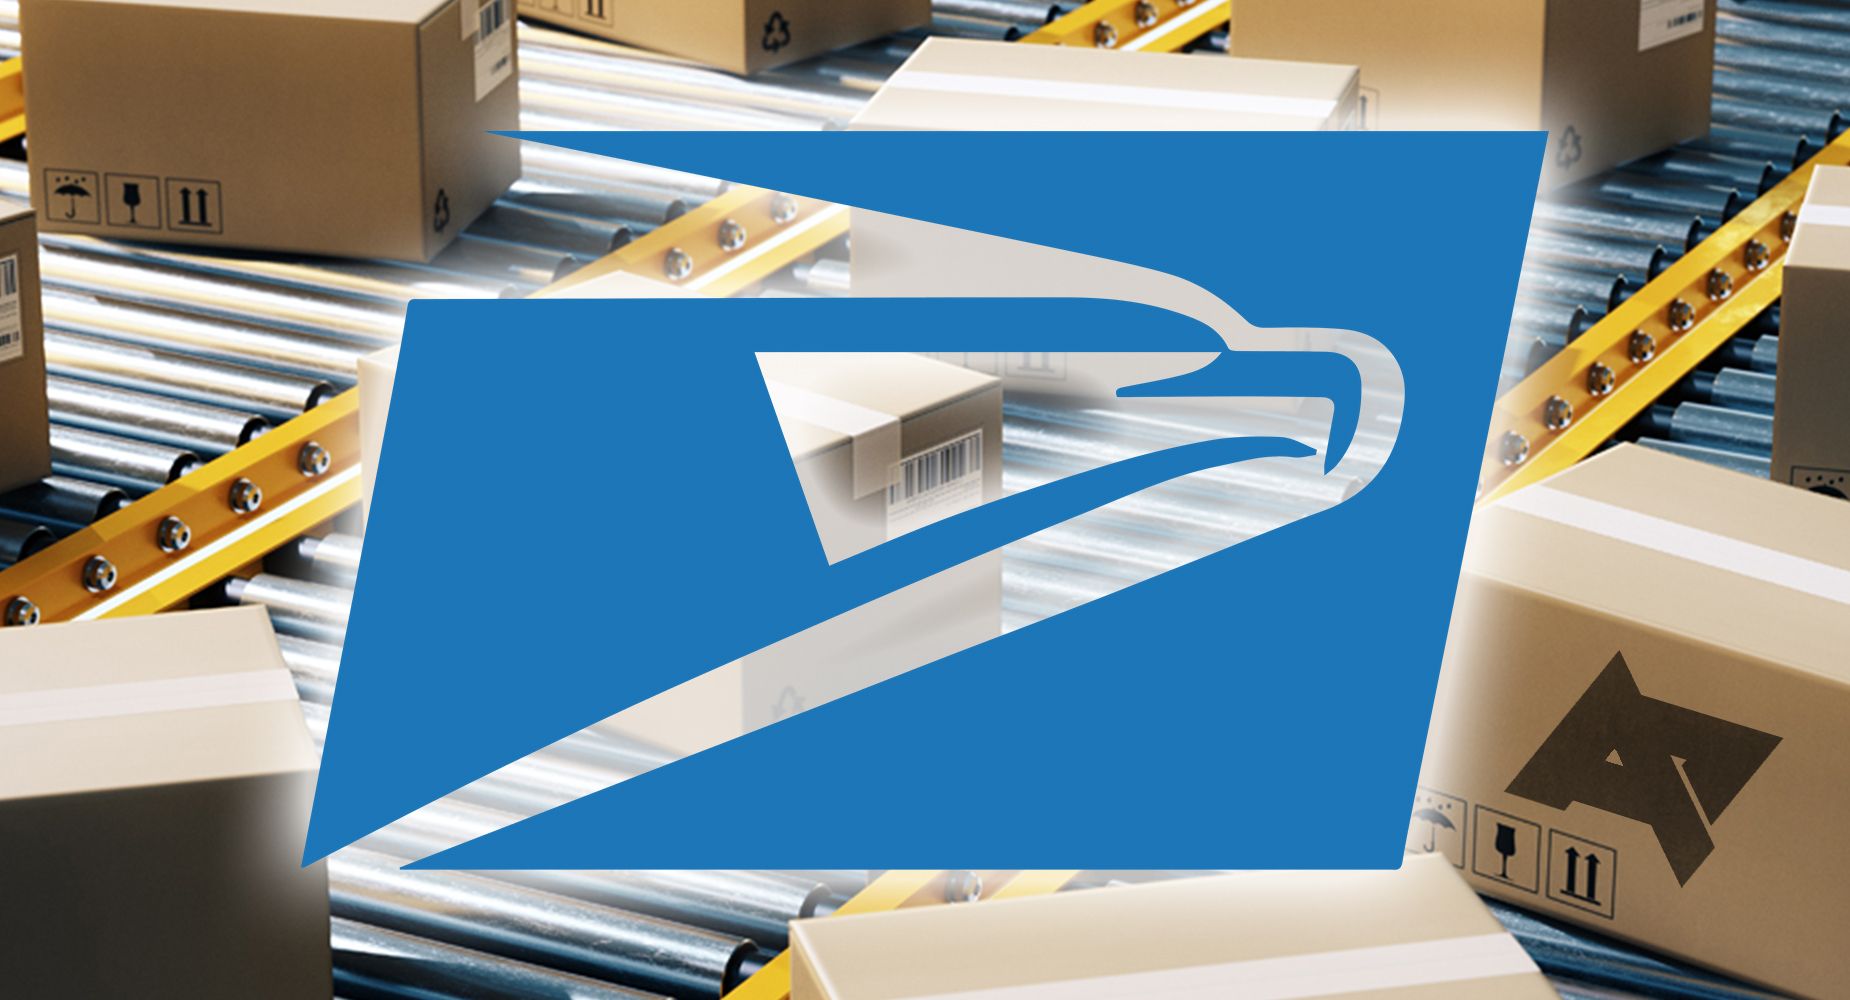 USPS logo over image of conveyers laden with packages